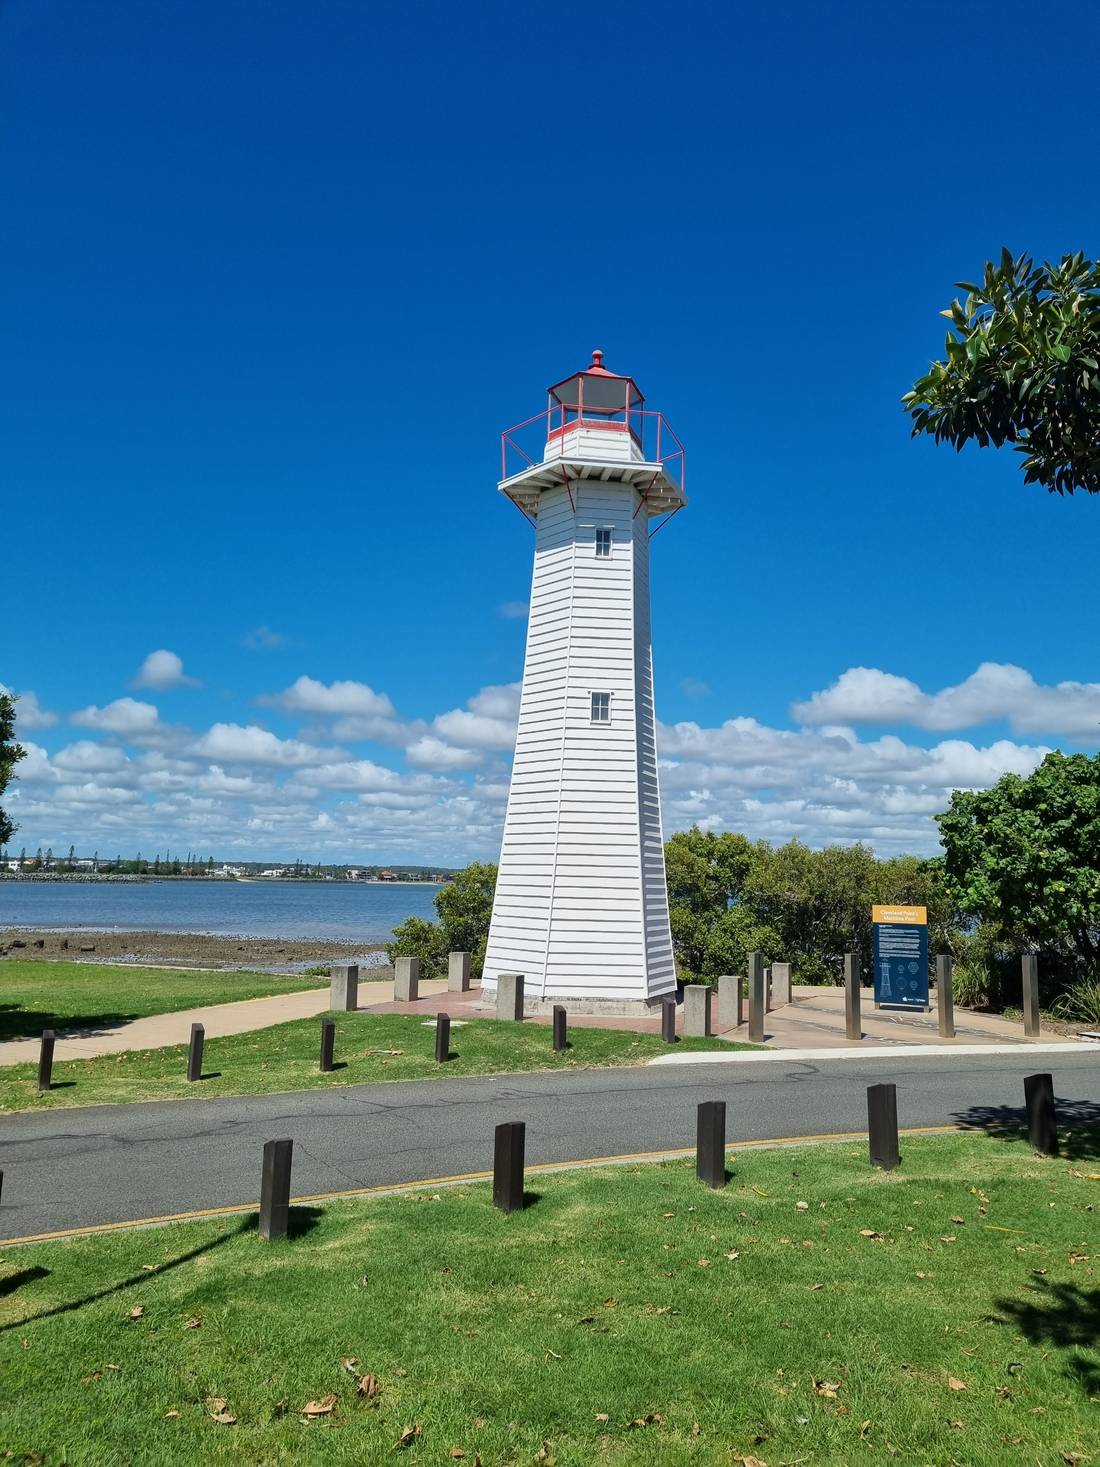 The Cleveland Point Lighthouse was built in 1864. It’s an unusual timber-clad, hexagonally-shaped building that’s 12 metres high.